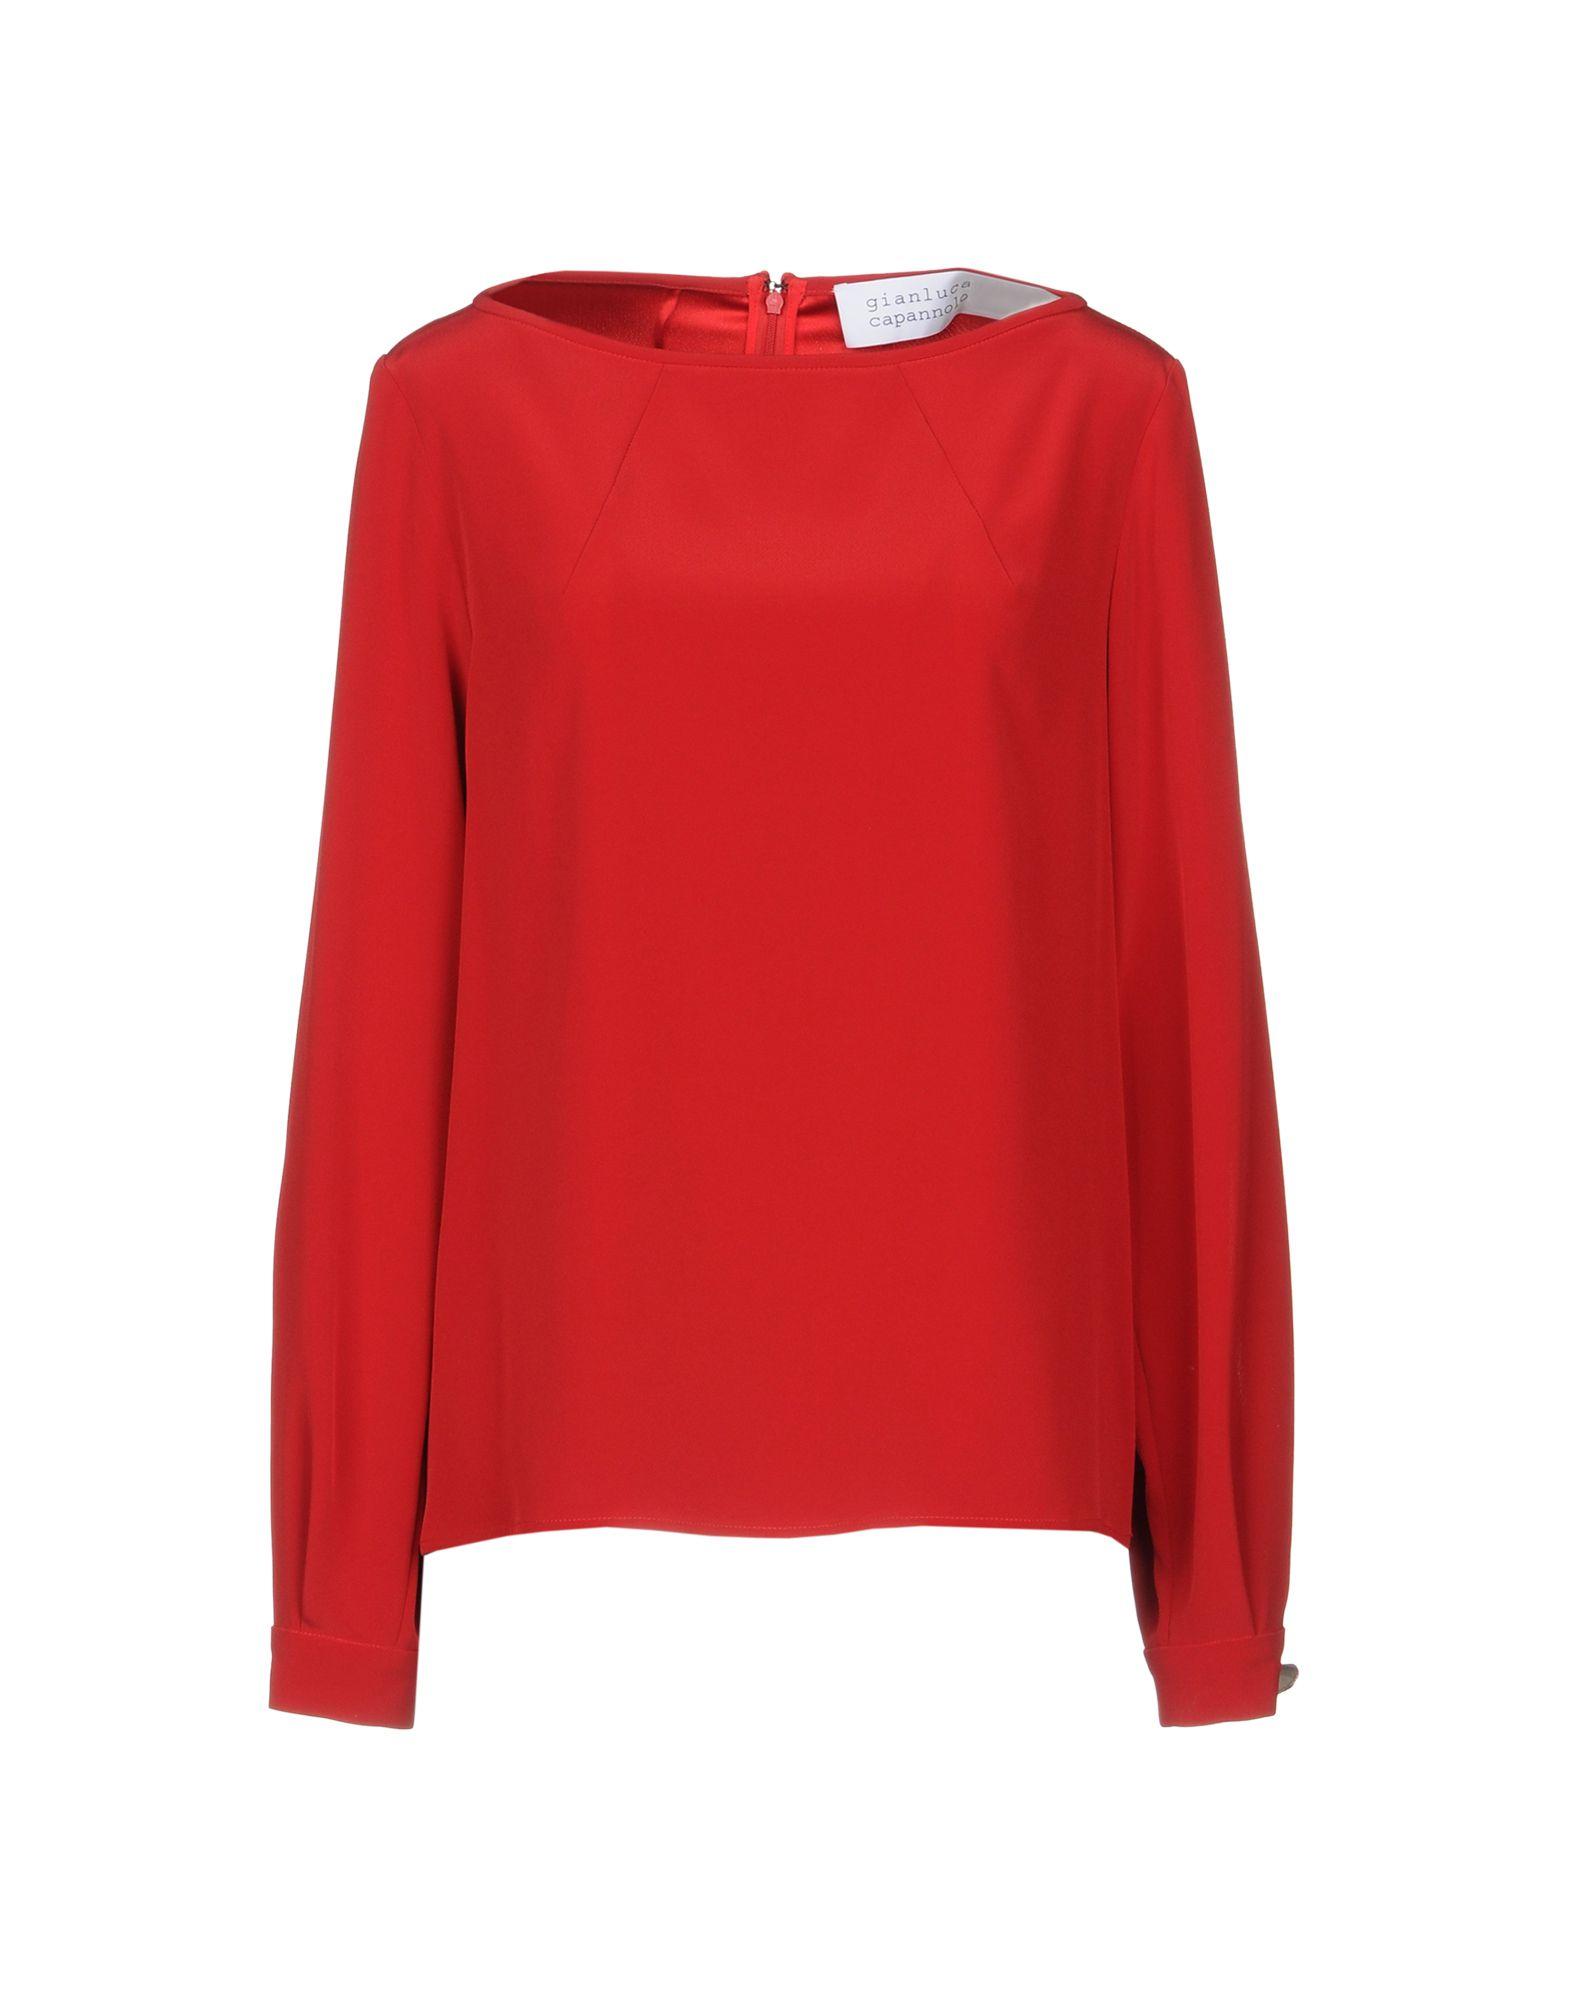 Gianluca Capannolo Blouse In Red | ModeSens